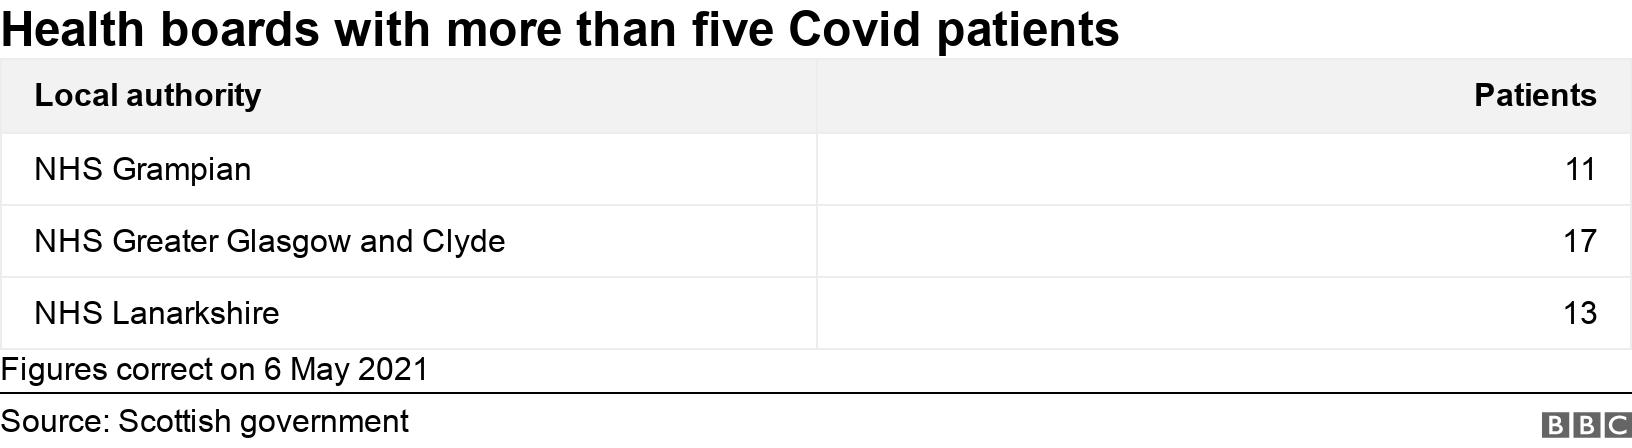 Health boards with more than five Covid patients. .  Figures correct on 6 May 2021.